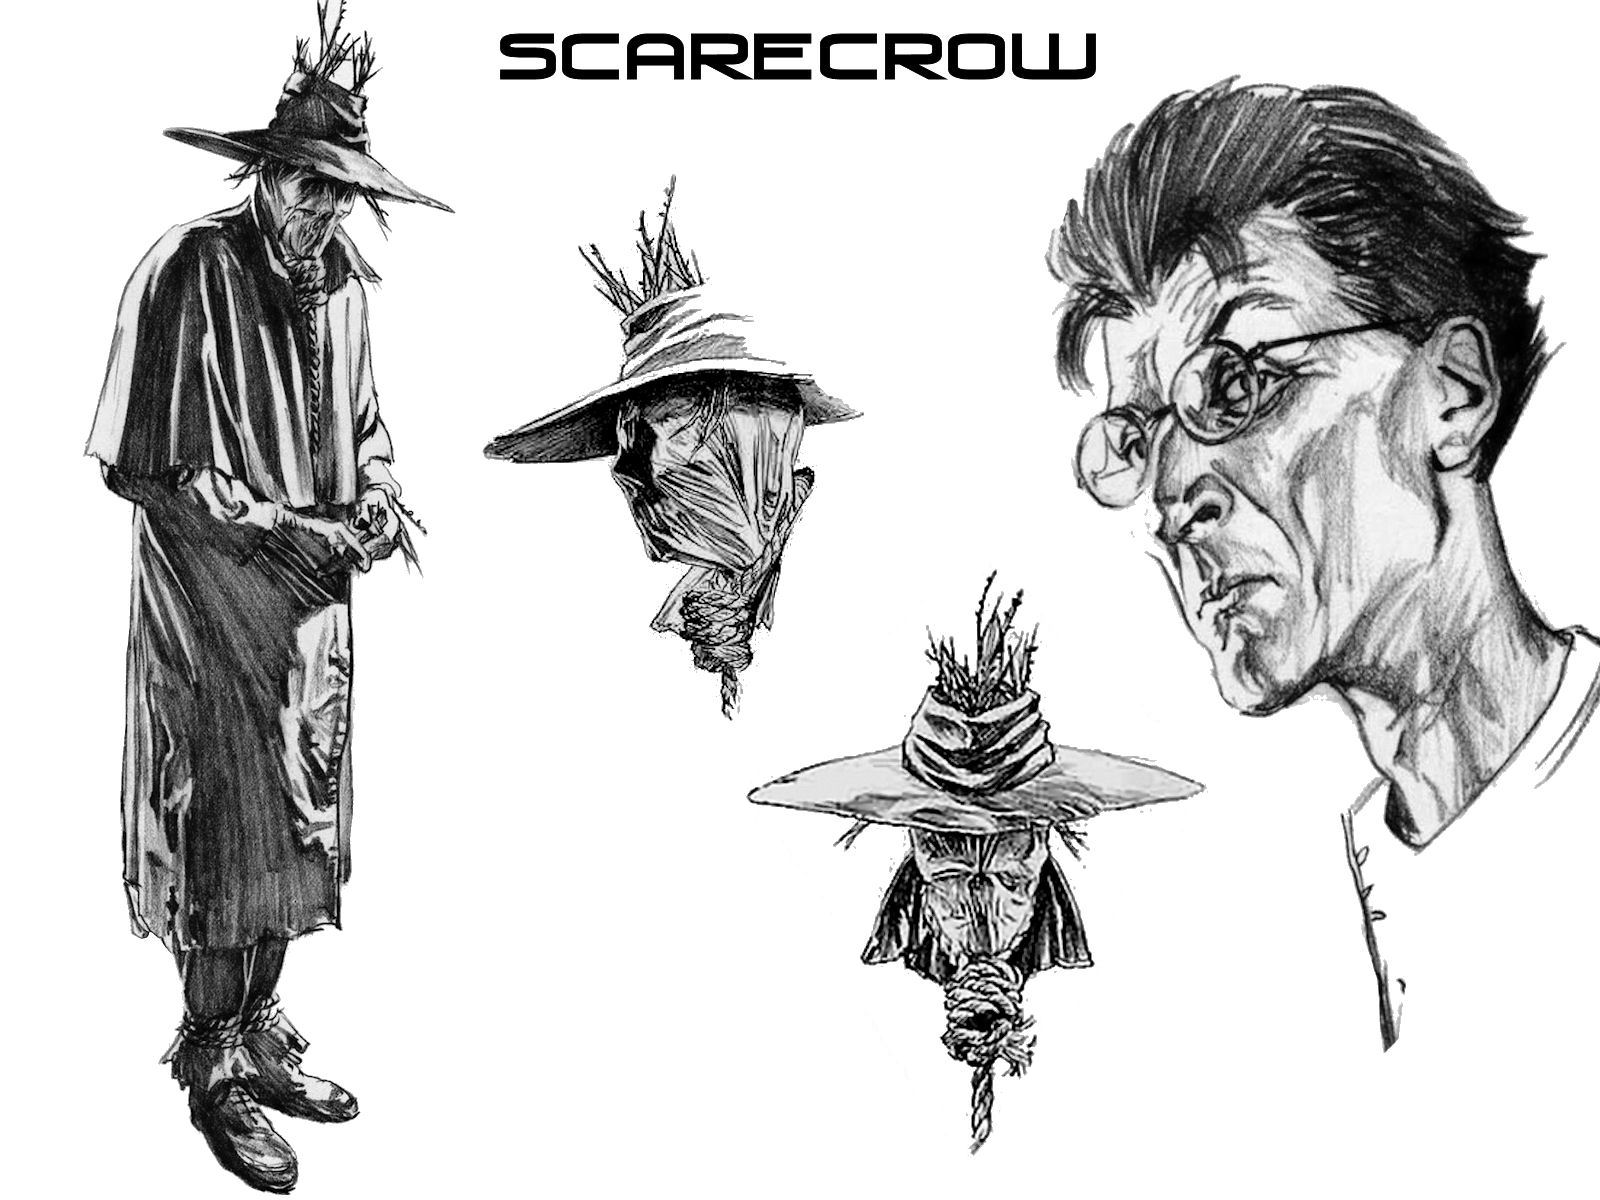 Do you have a preferred look for Scarecrow? Mine is the Alex Ross version.